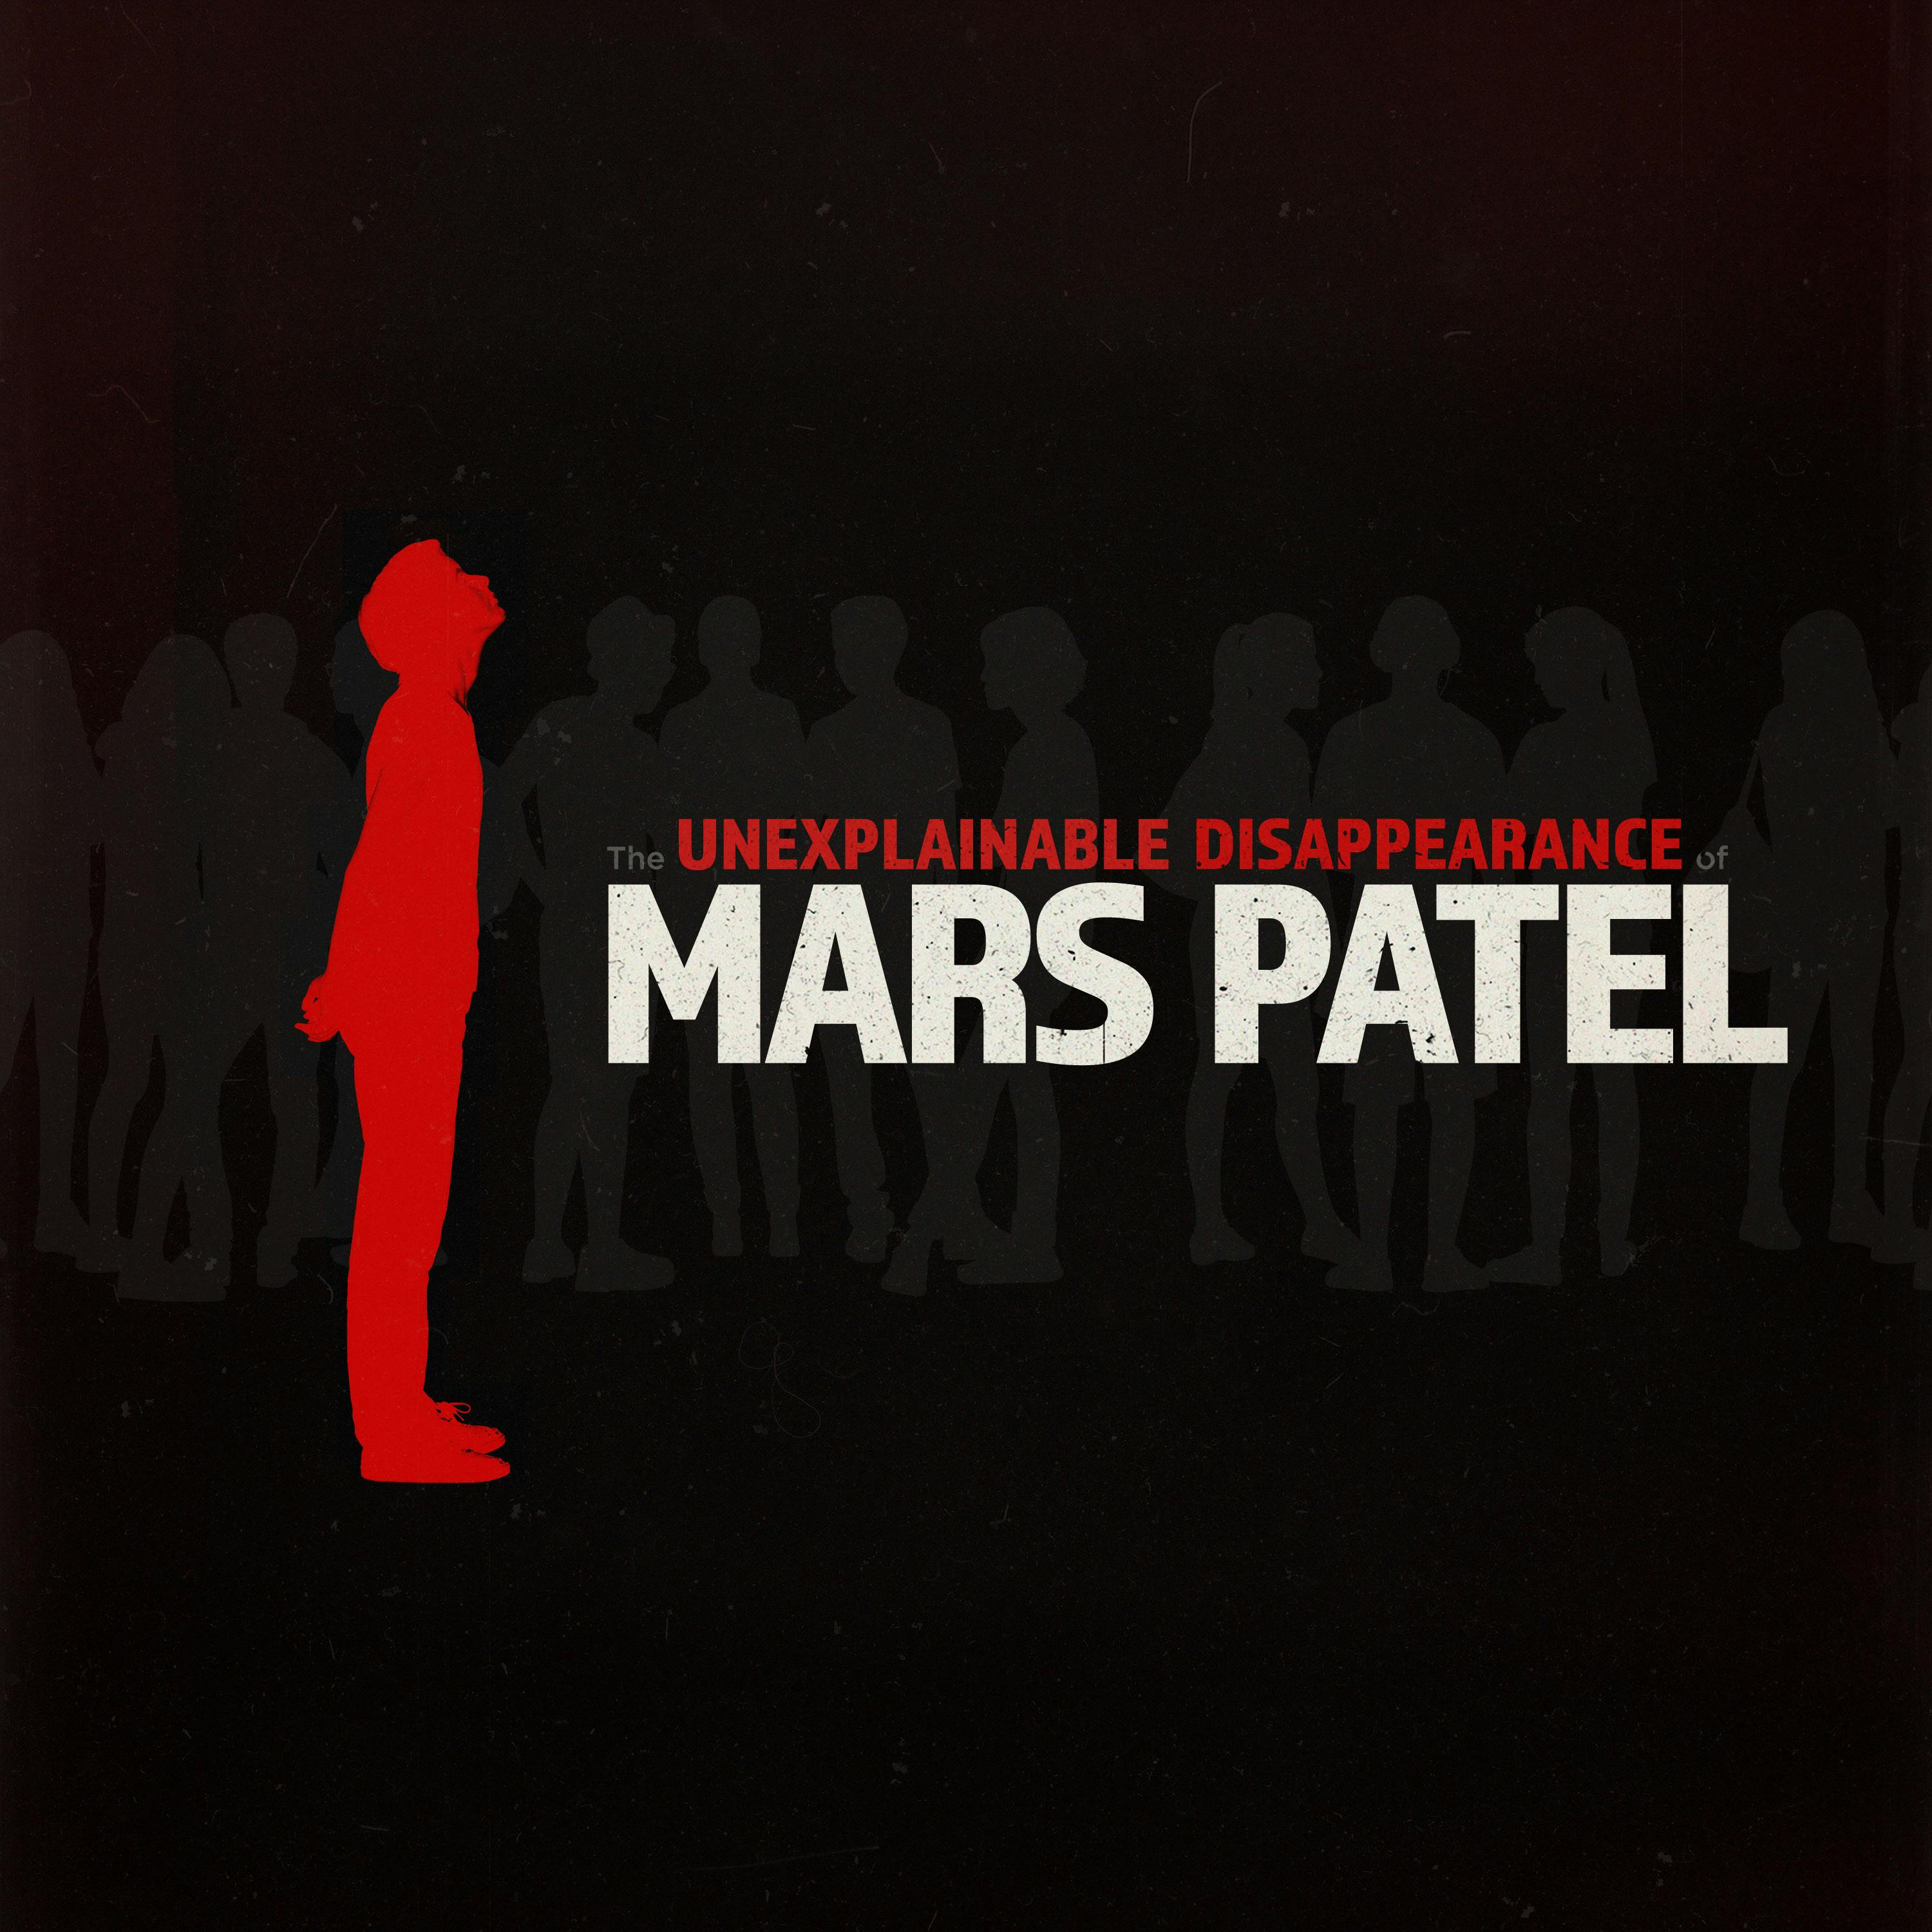 The Unexplainable Disappearance of Mars Patel podcast show image